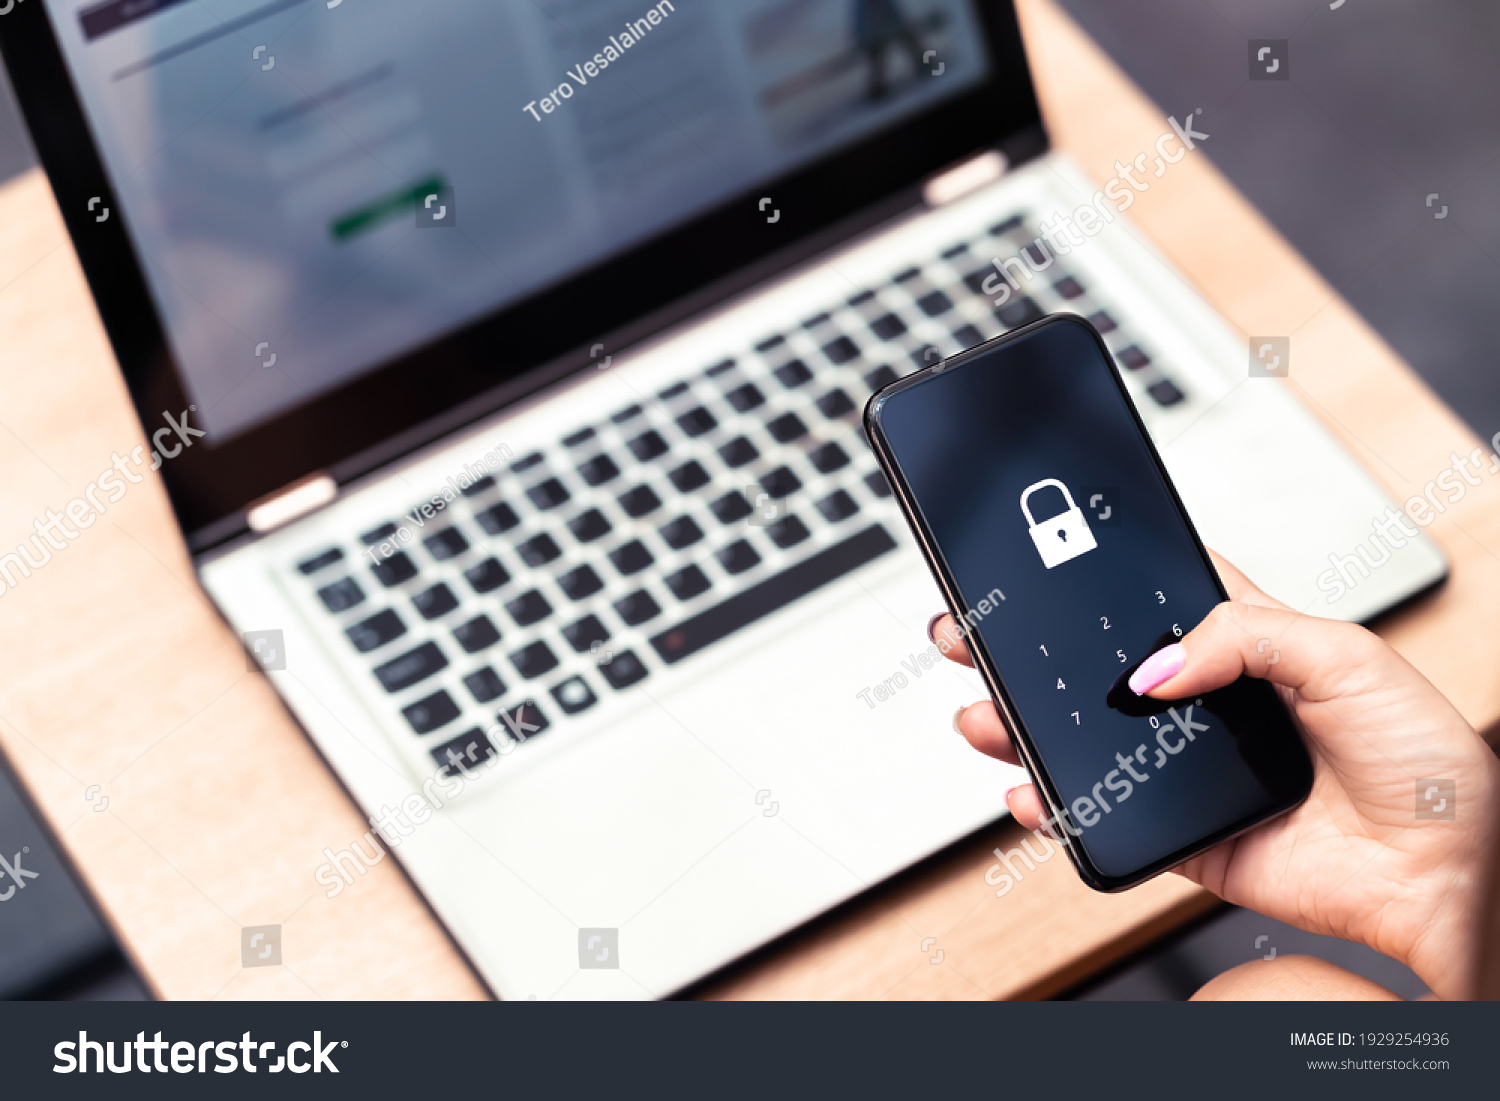 Phone password lock for mobile cyber security or login verification passcode in online bank app. Data privacy and protection from hacker, identity thief or cybersecurity threat. Laptop and smartphone. #1929254936